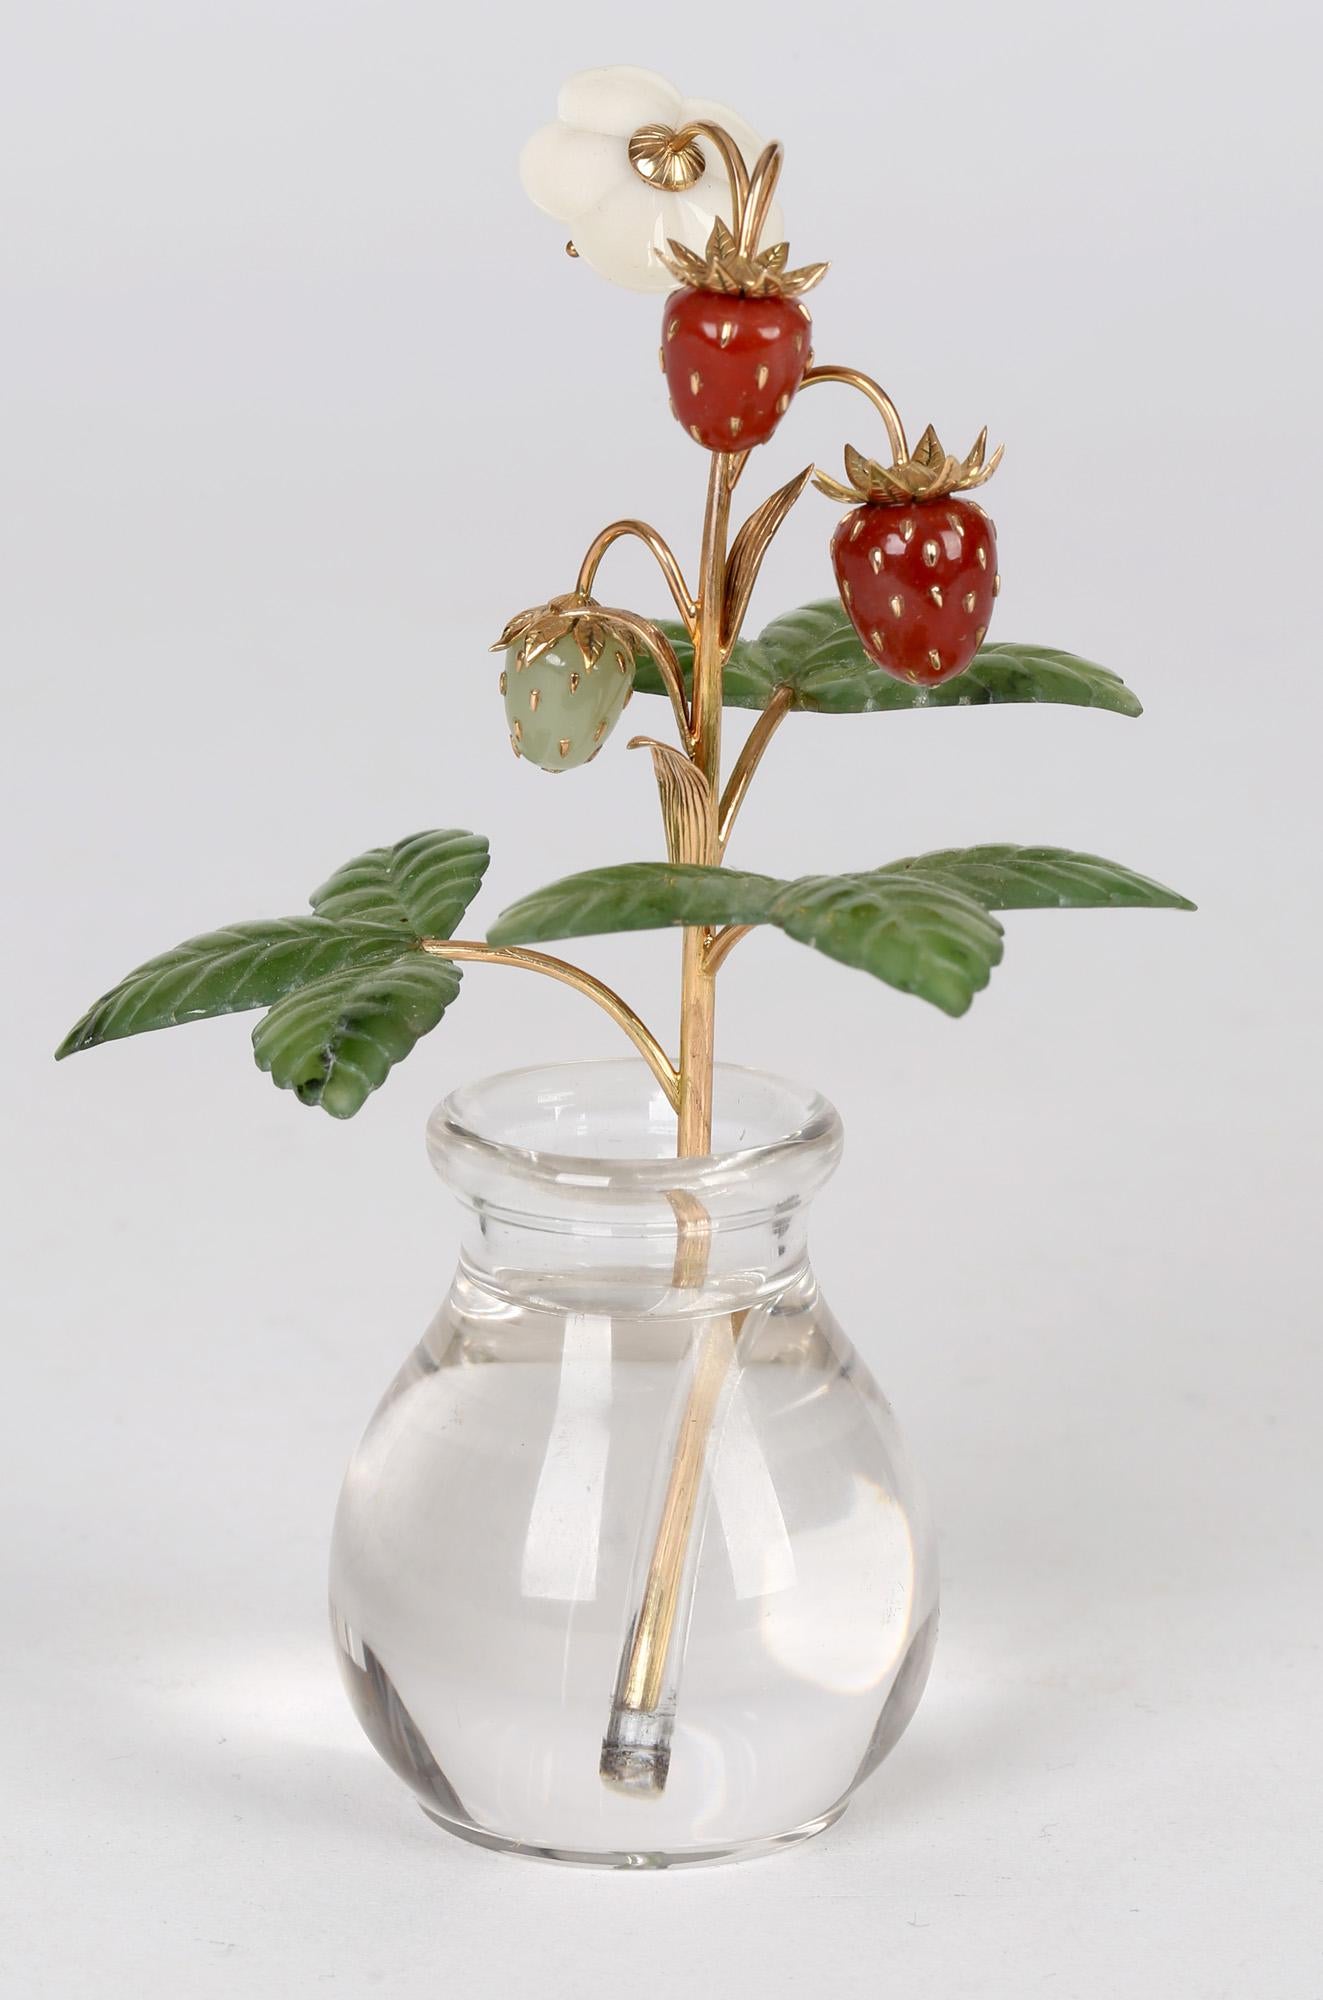 Russian Fabergé Style Exquisite Wild Strawberry Stem with Crystal Vase